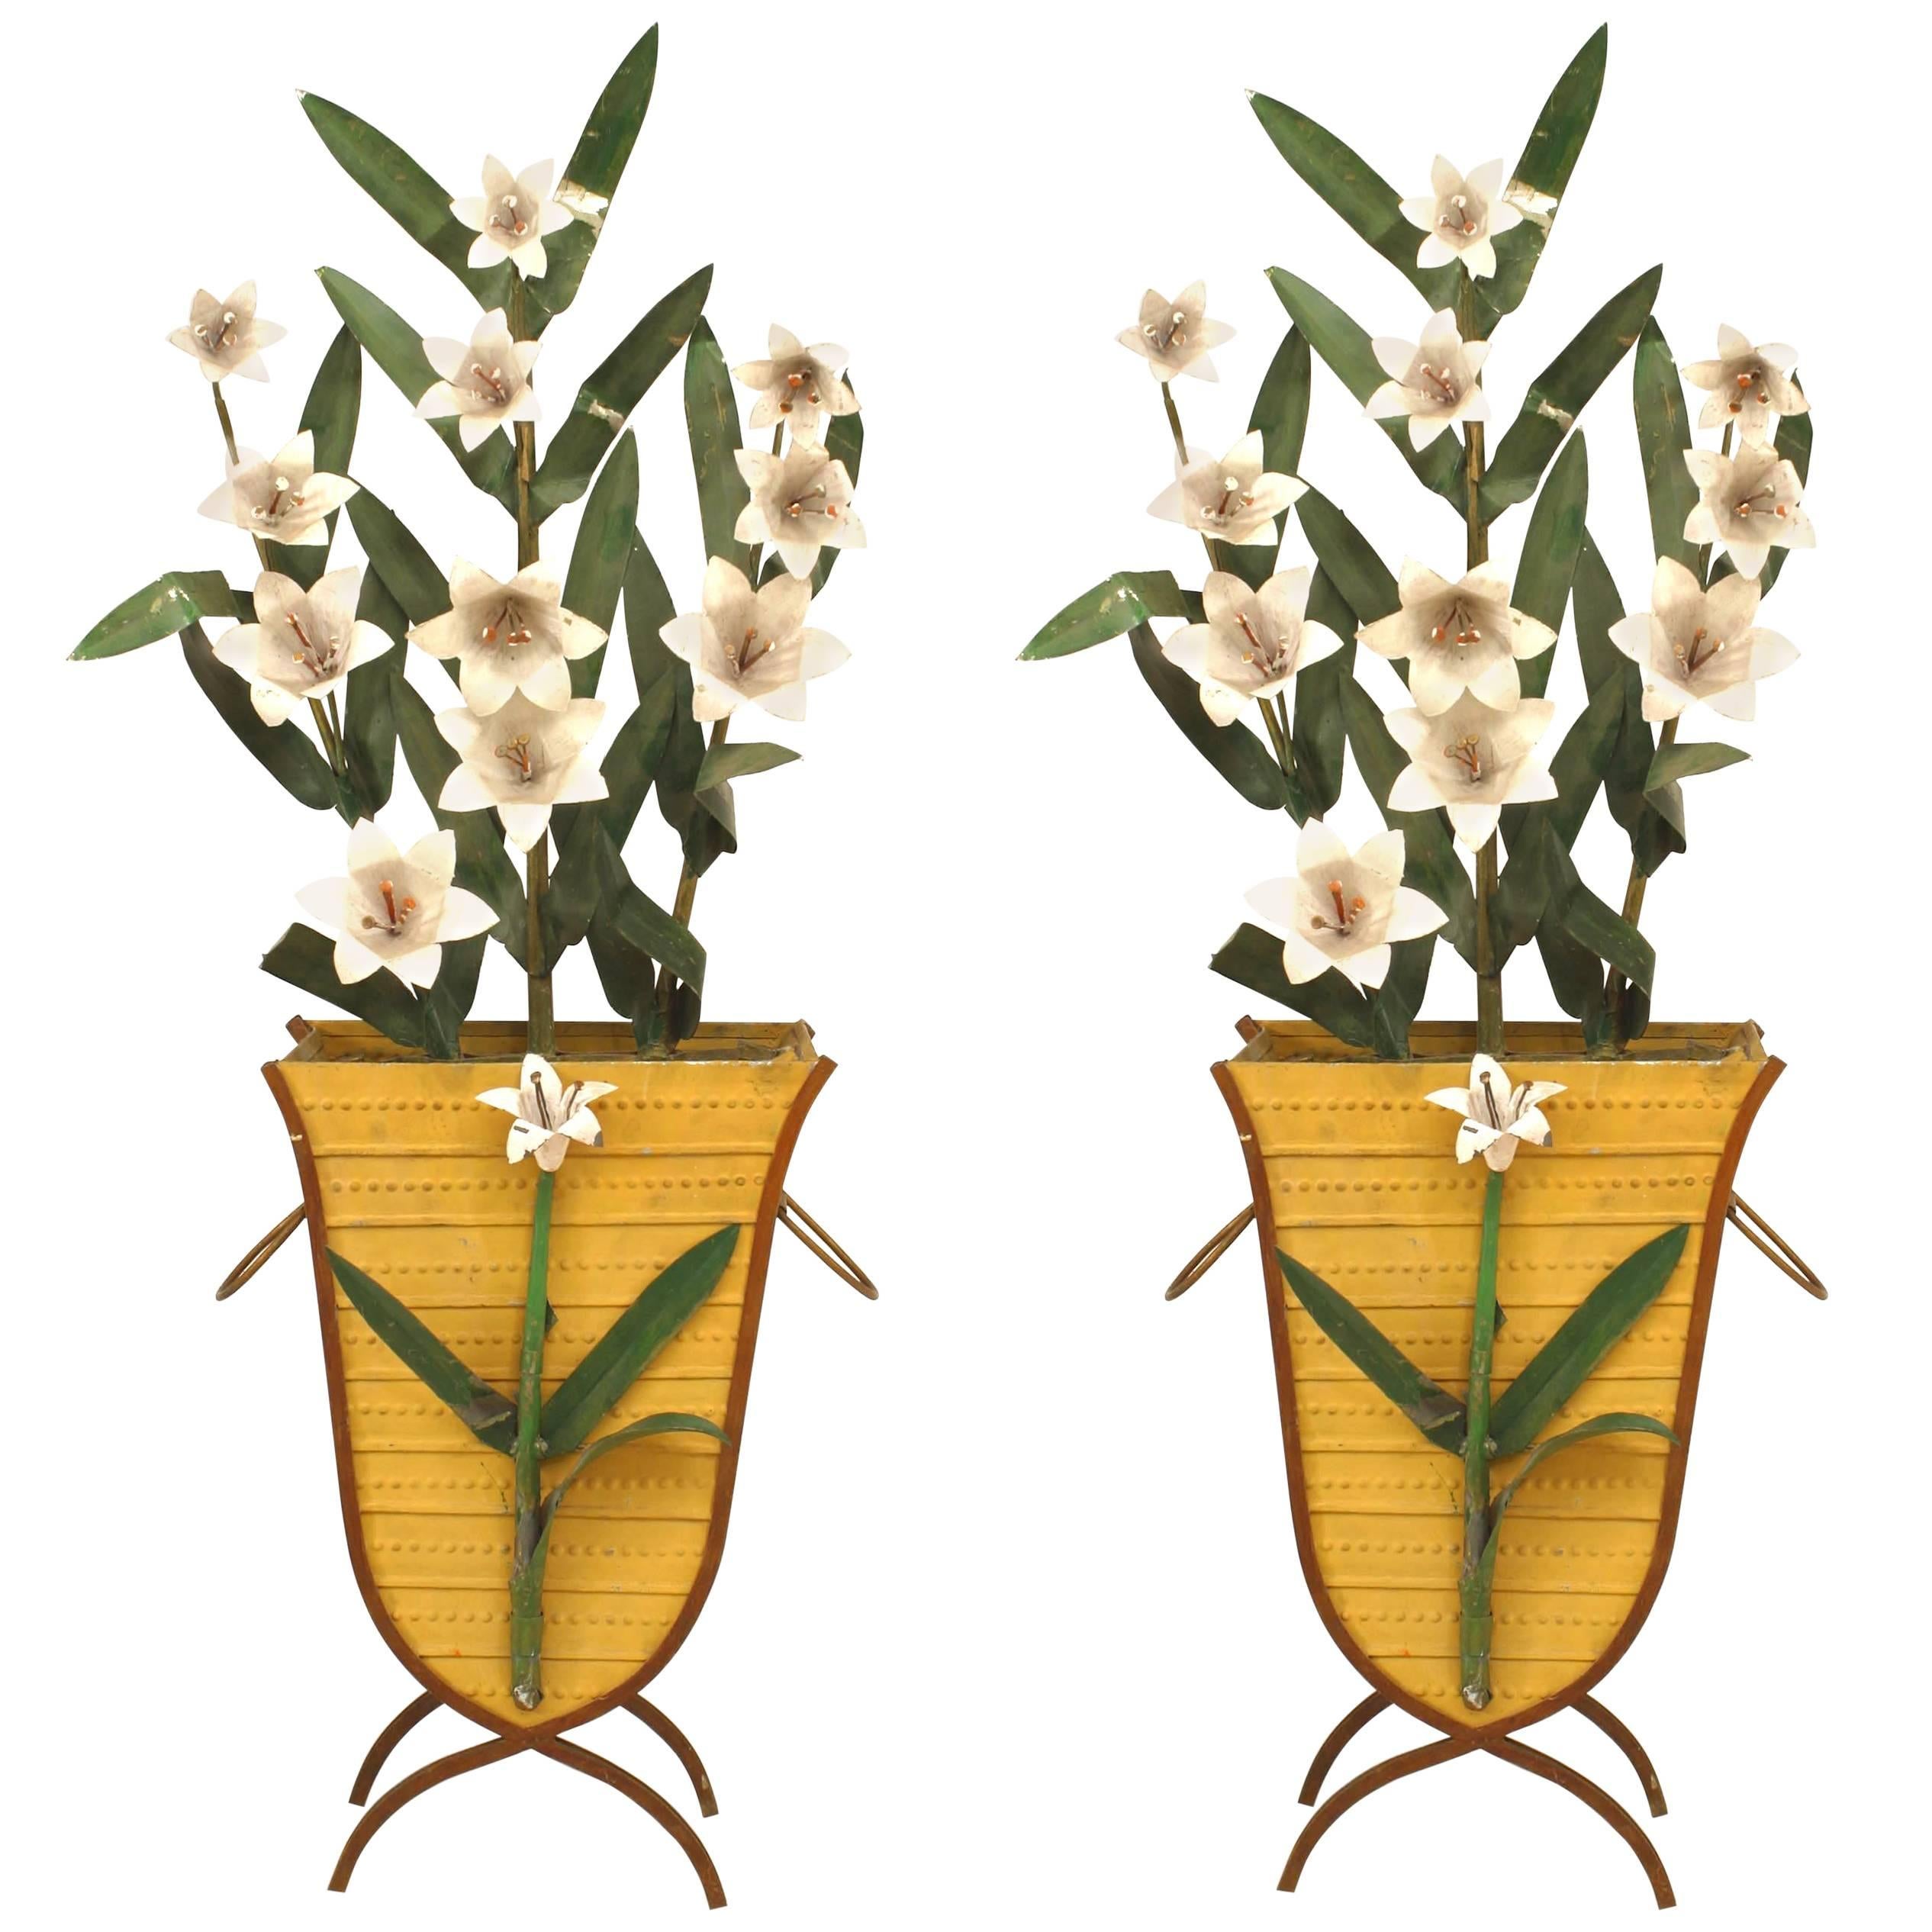 Pair of American Art Moderne Tole Baskets with Lillies For Sale at 1stDibs